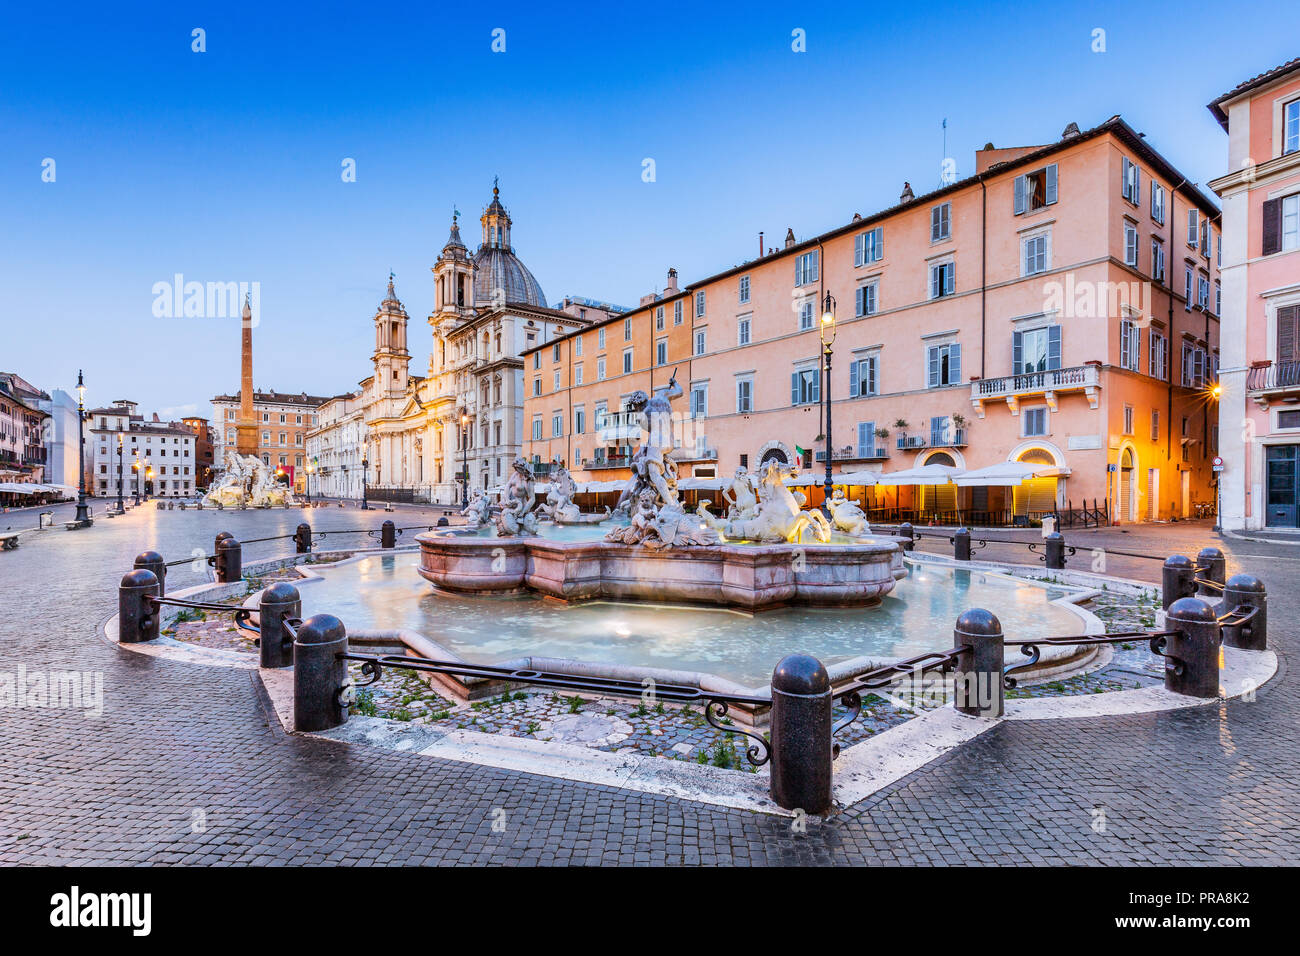 Rome, Italy. La Fontana del Moro (the Moor Fountain) at the southern end of the Piazza Navona. Stock Photo